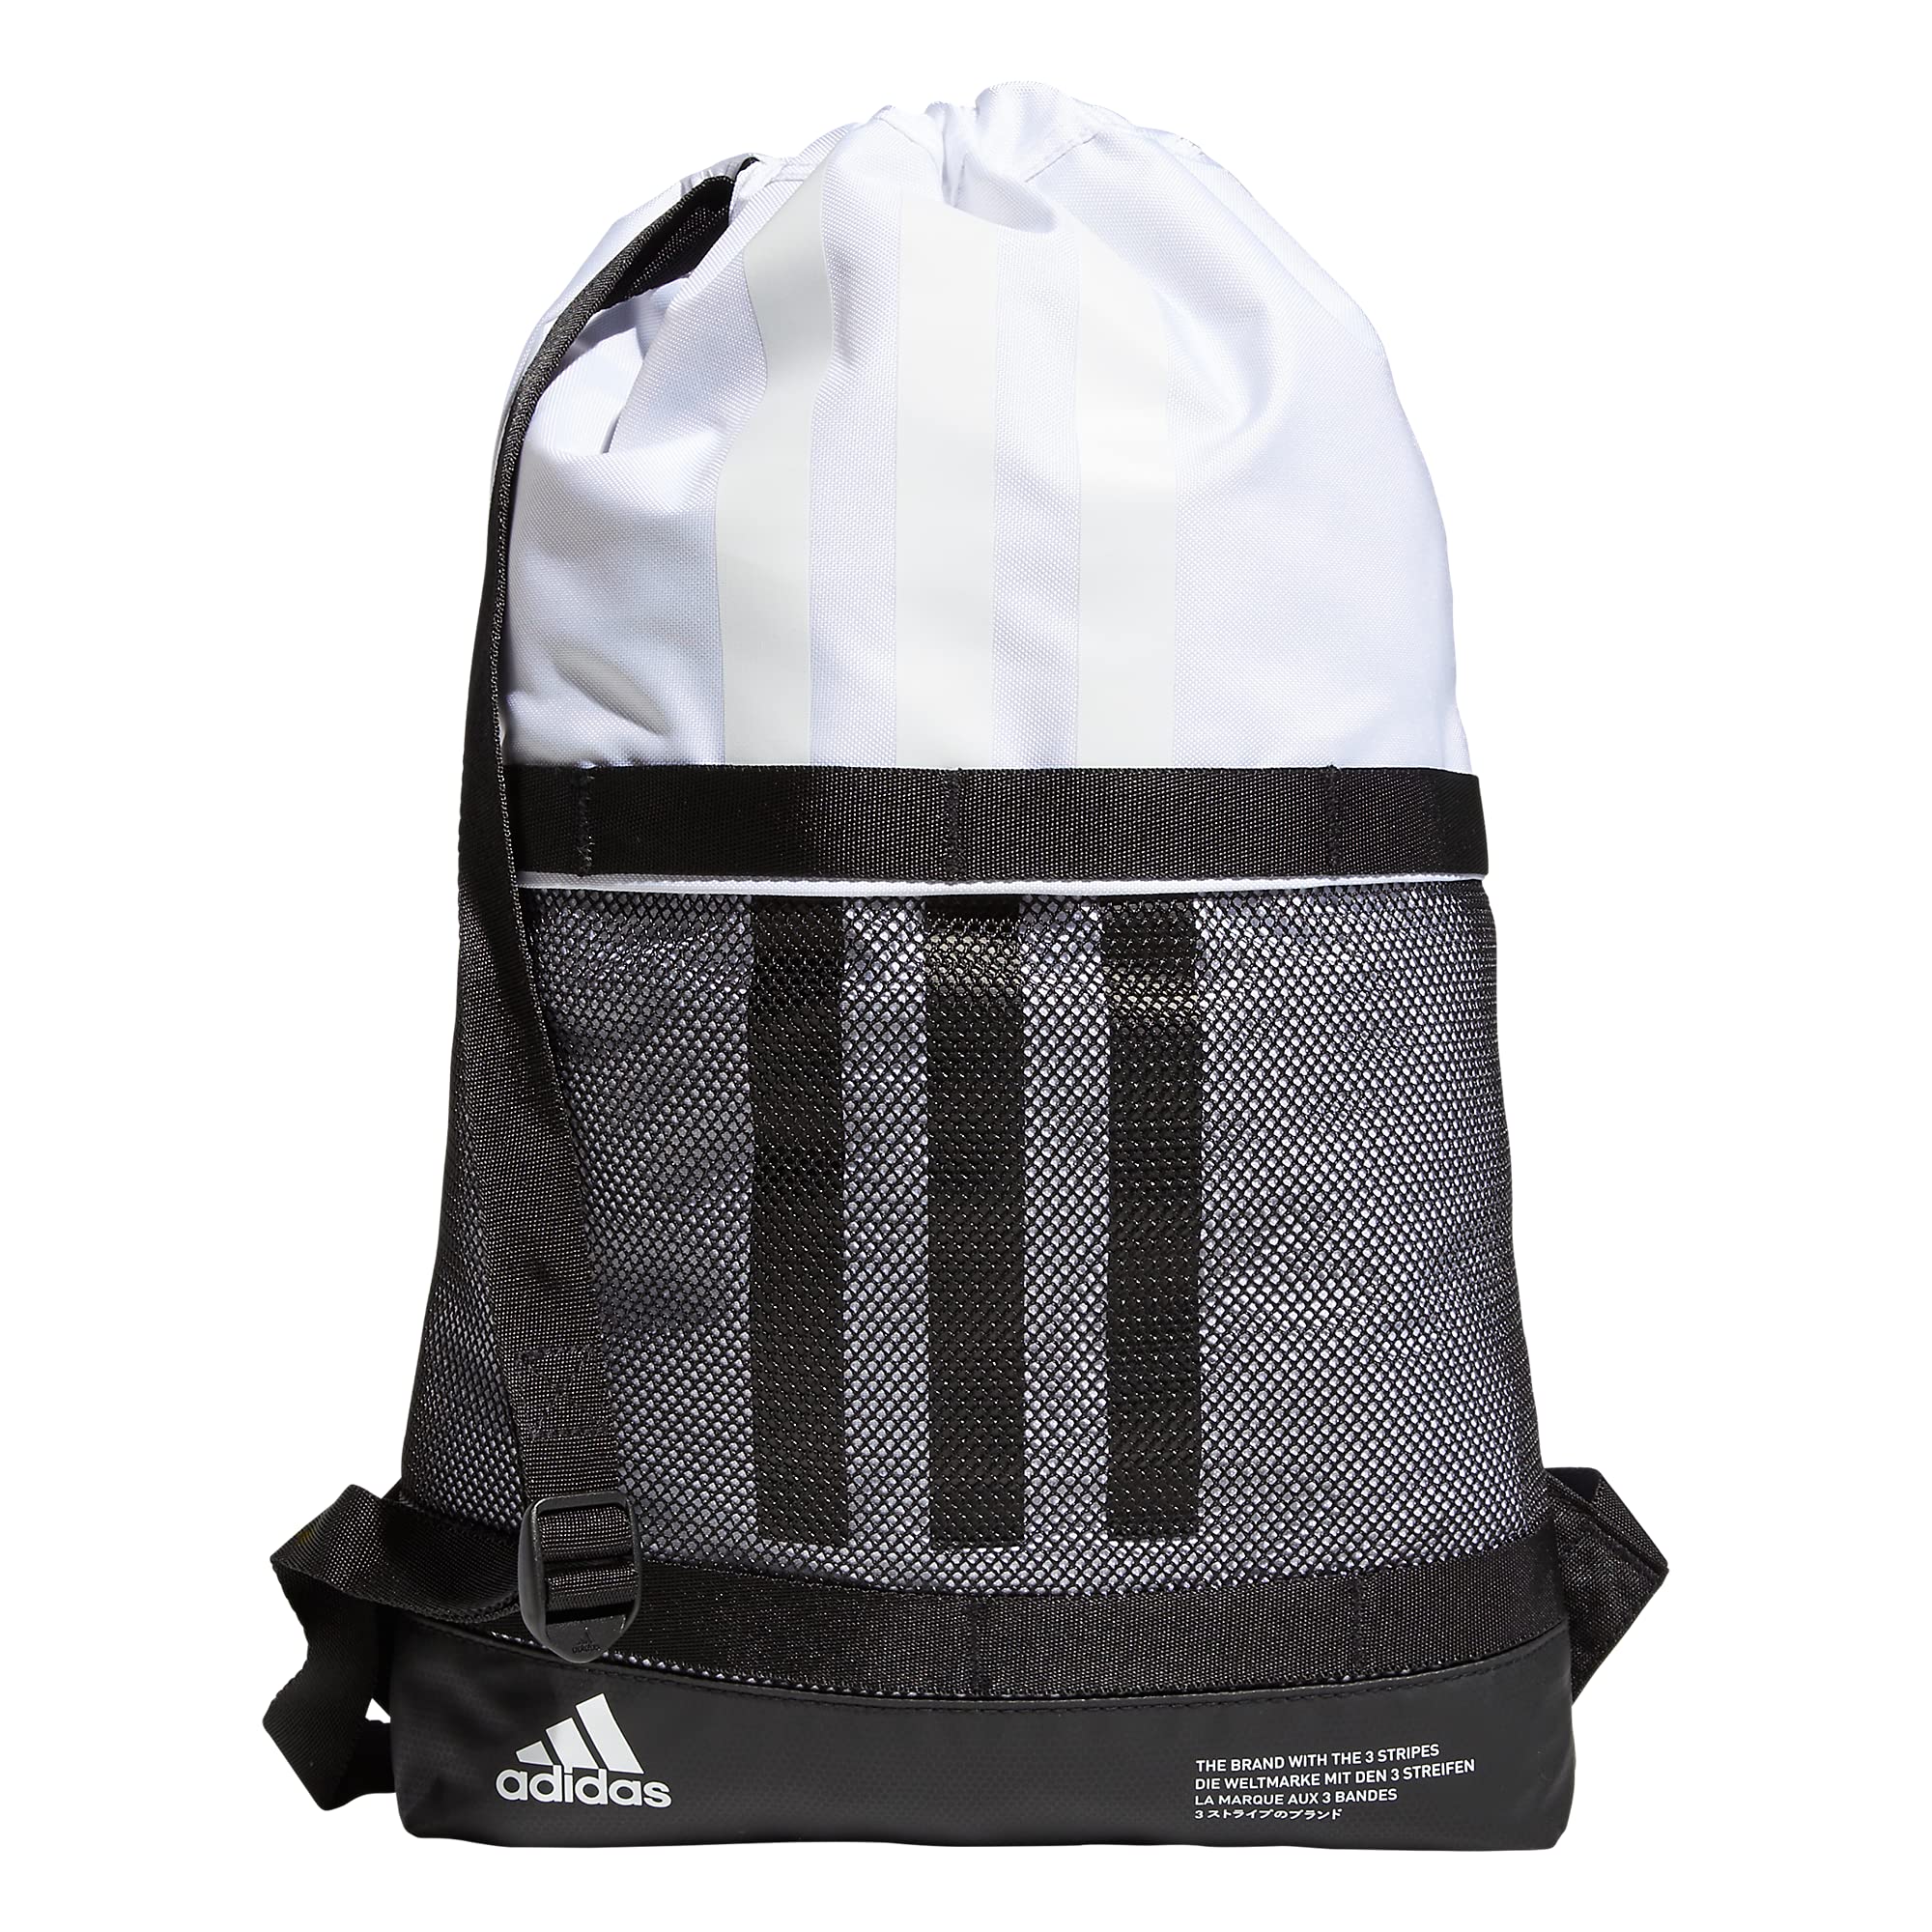 adidas Amplifier II Blocked Sackpack (White, Black) $6 + Free Shipping w/ Prime or on $25+